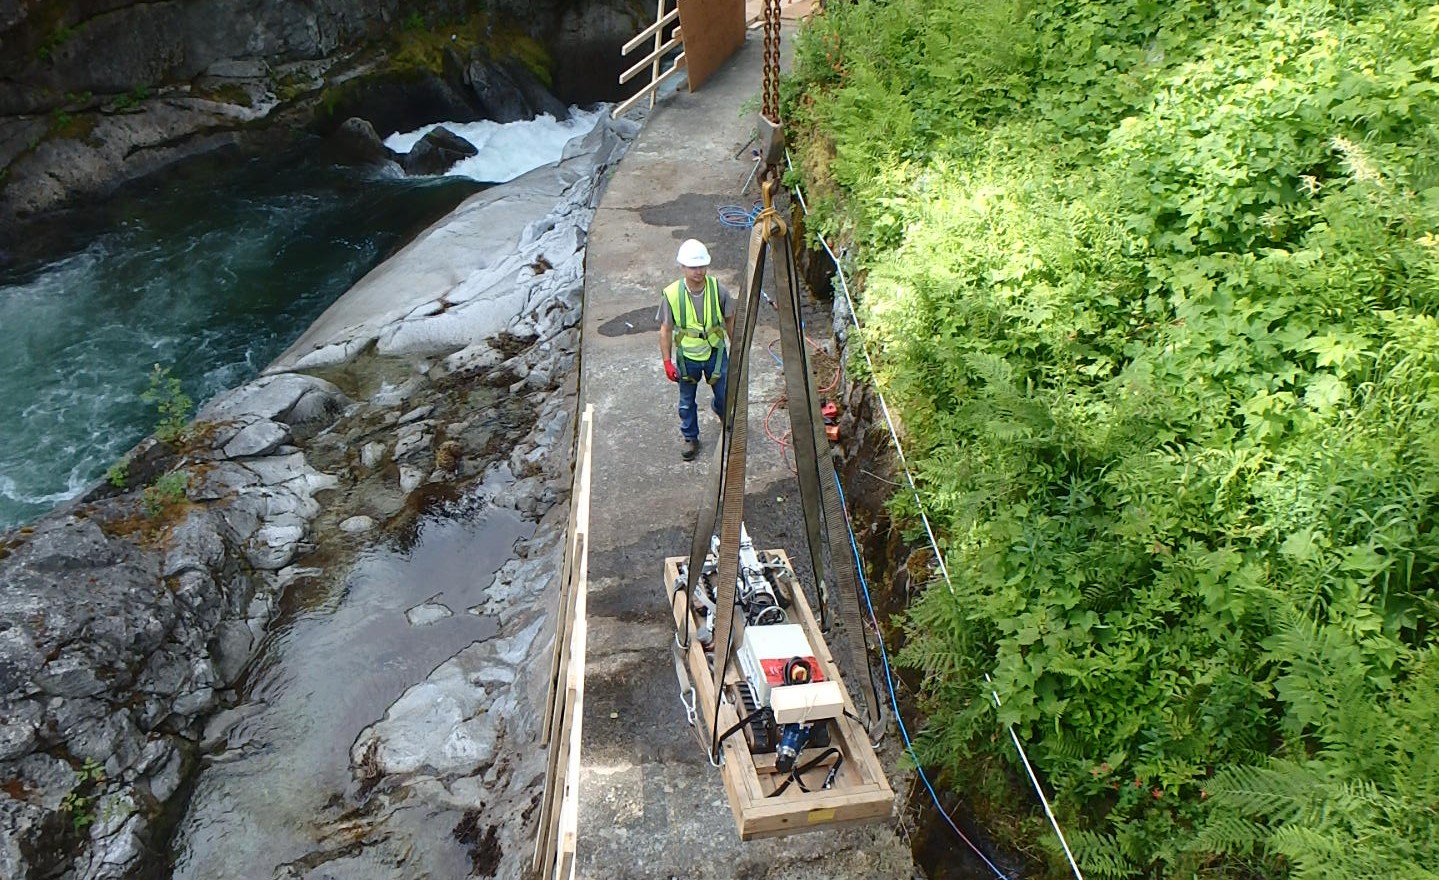 sewervue surveyor being lowered to access point